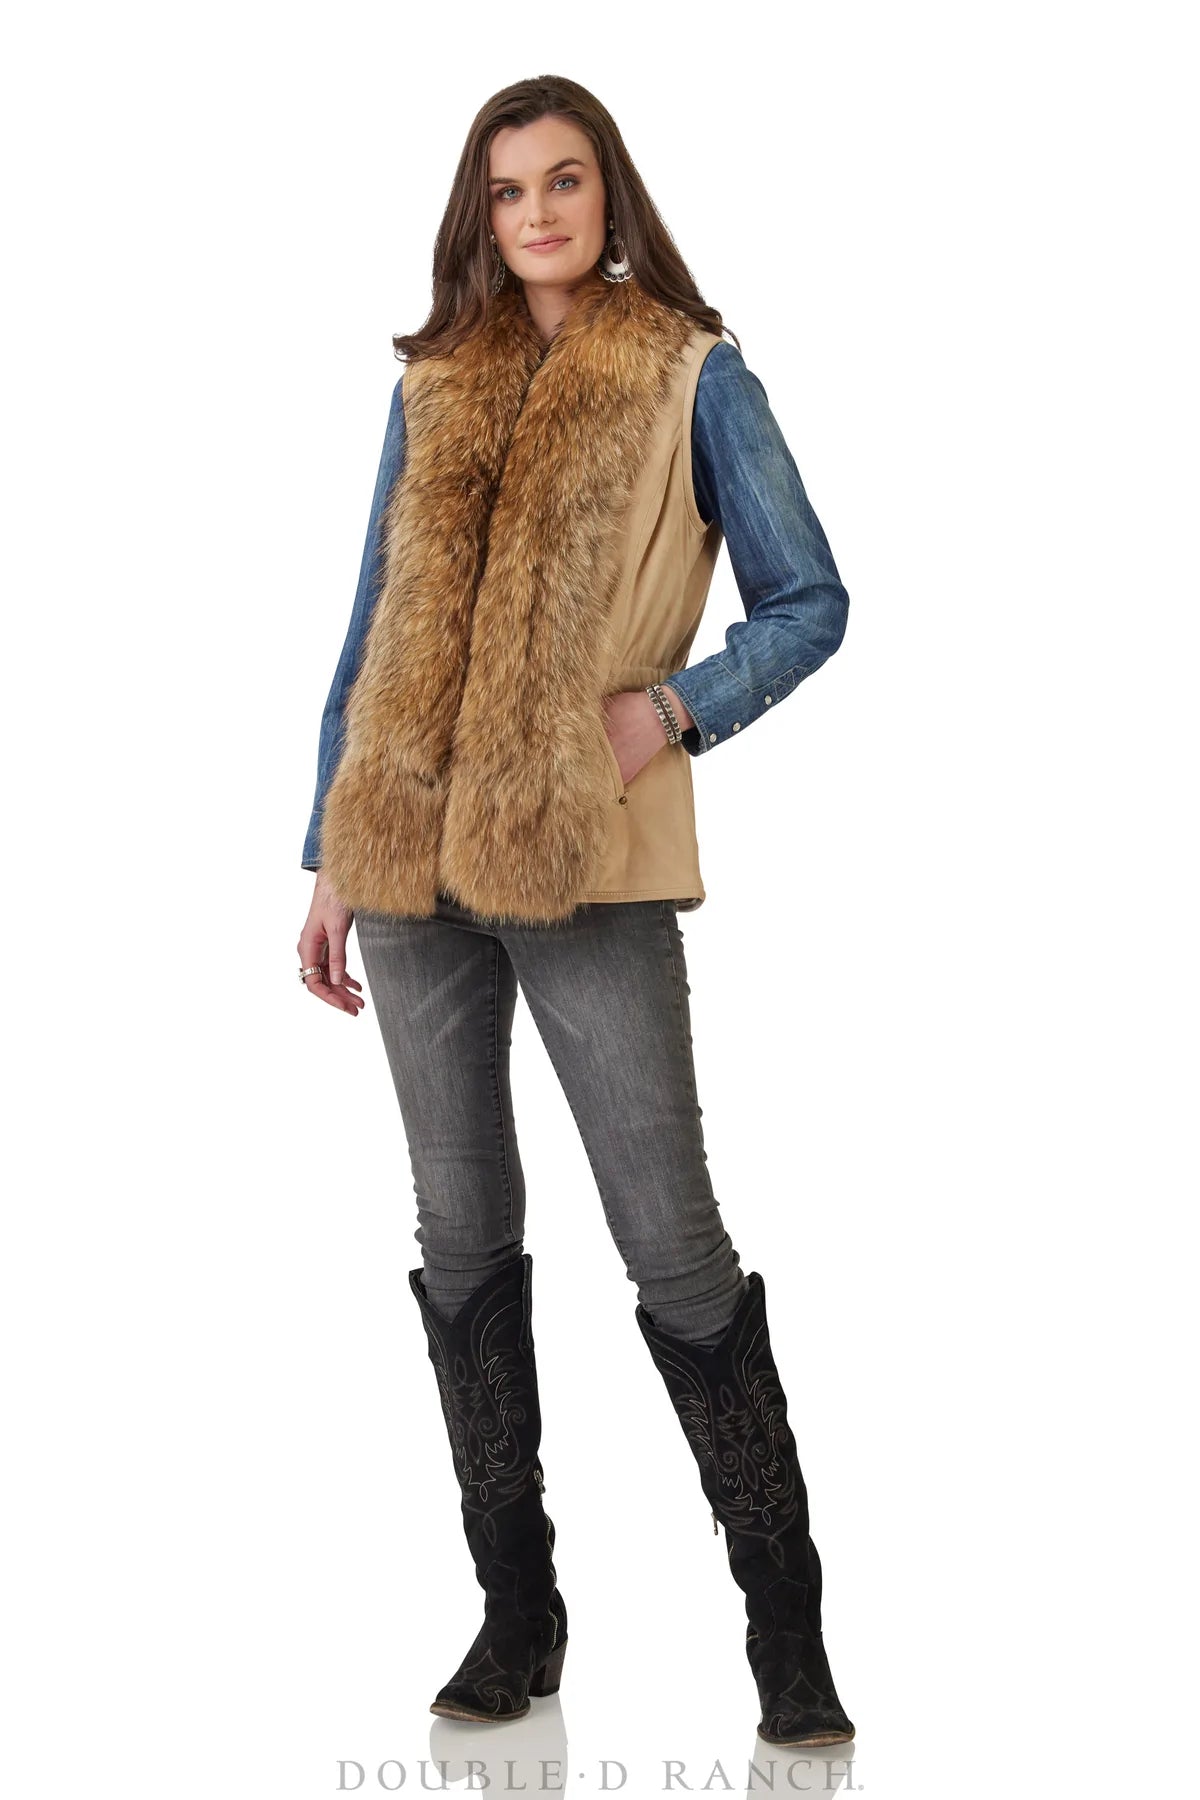 DDR Hondo Vest in Trail Dust Tan at 6Whiskey six whisky double d ranch eloise and walker fall collection V977 goat suede and racoon fur